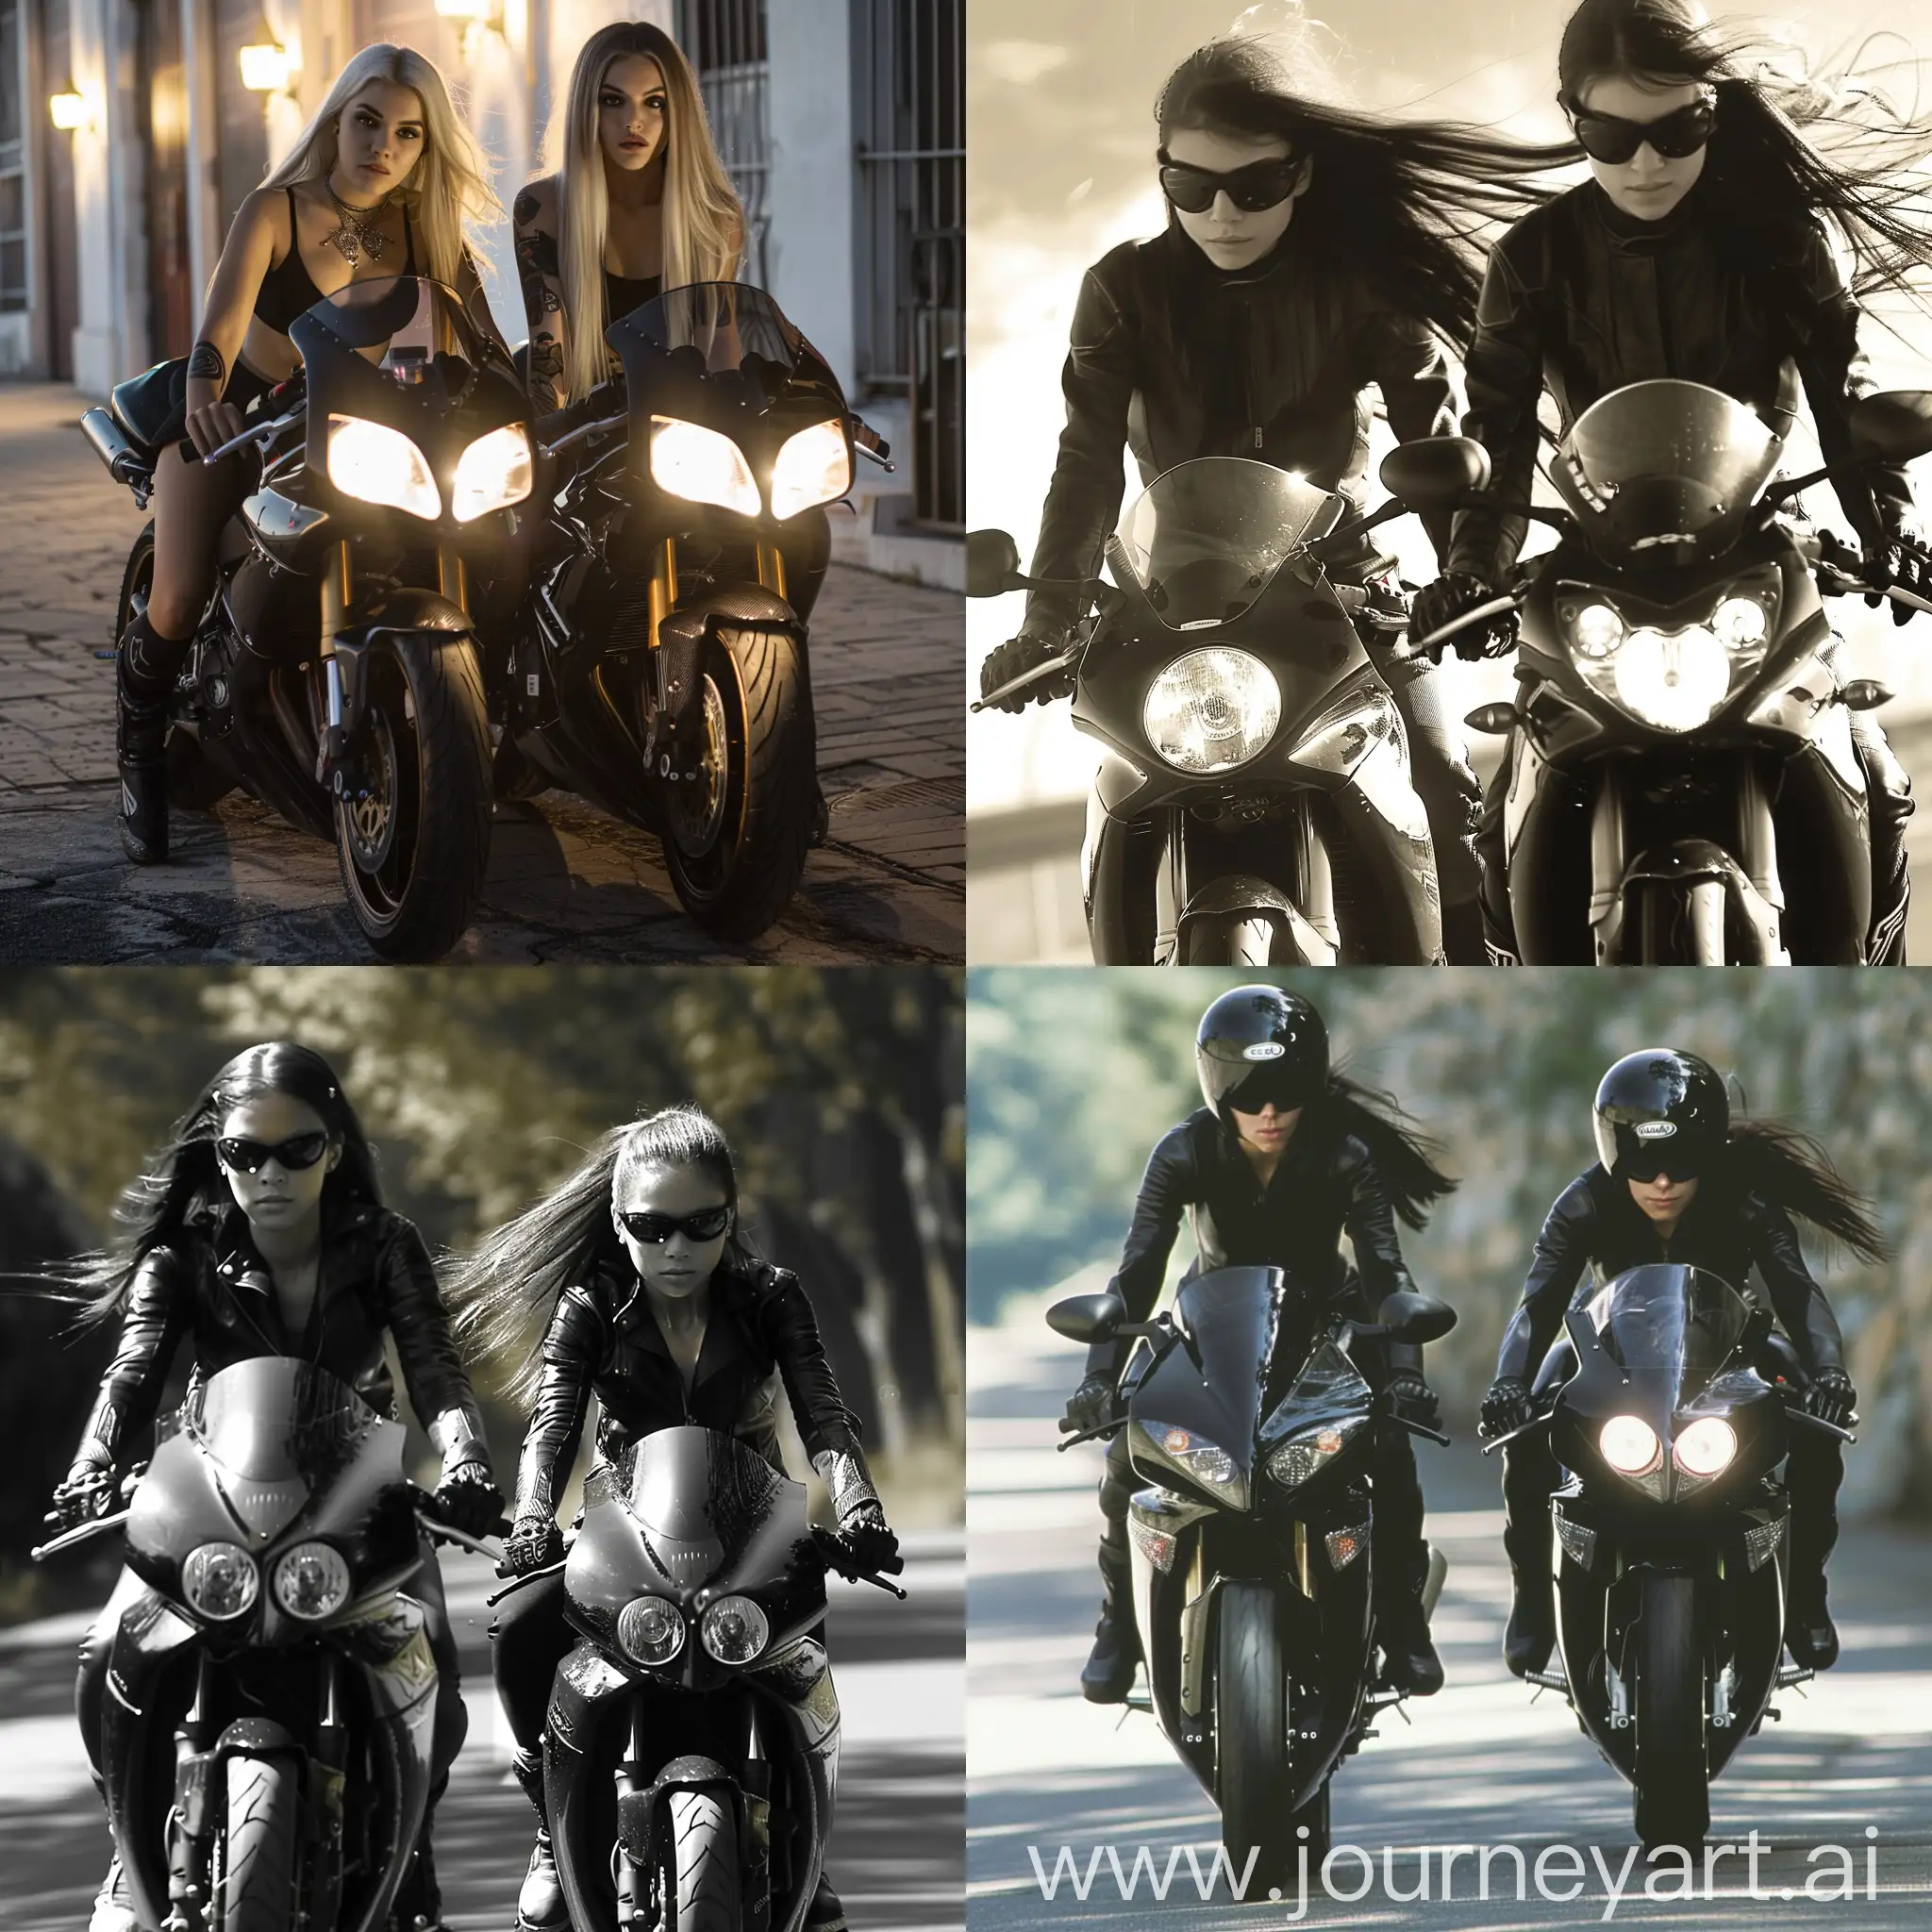 Two girls in the style of the matrix movie ride sports motorcycles